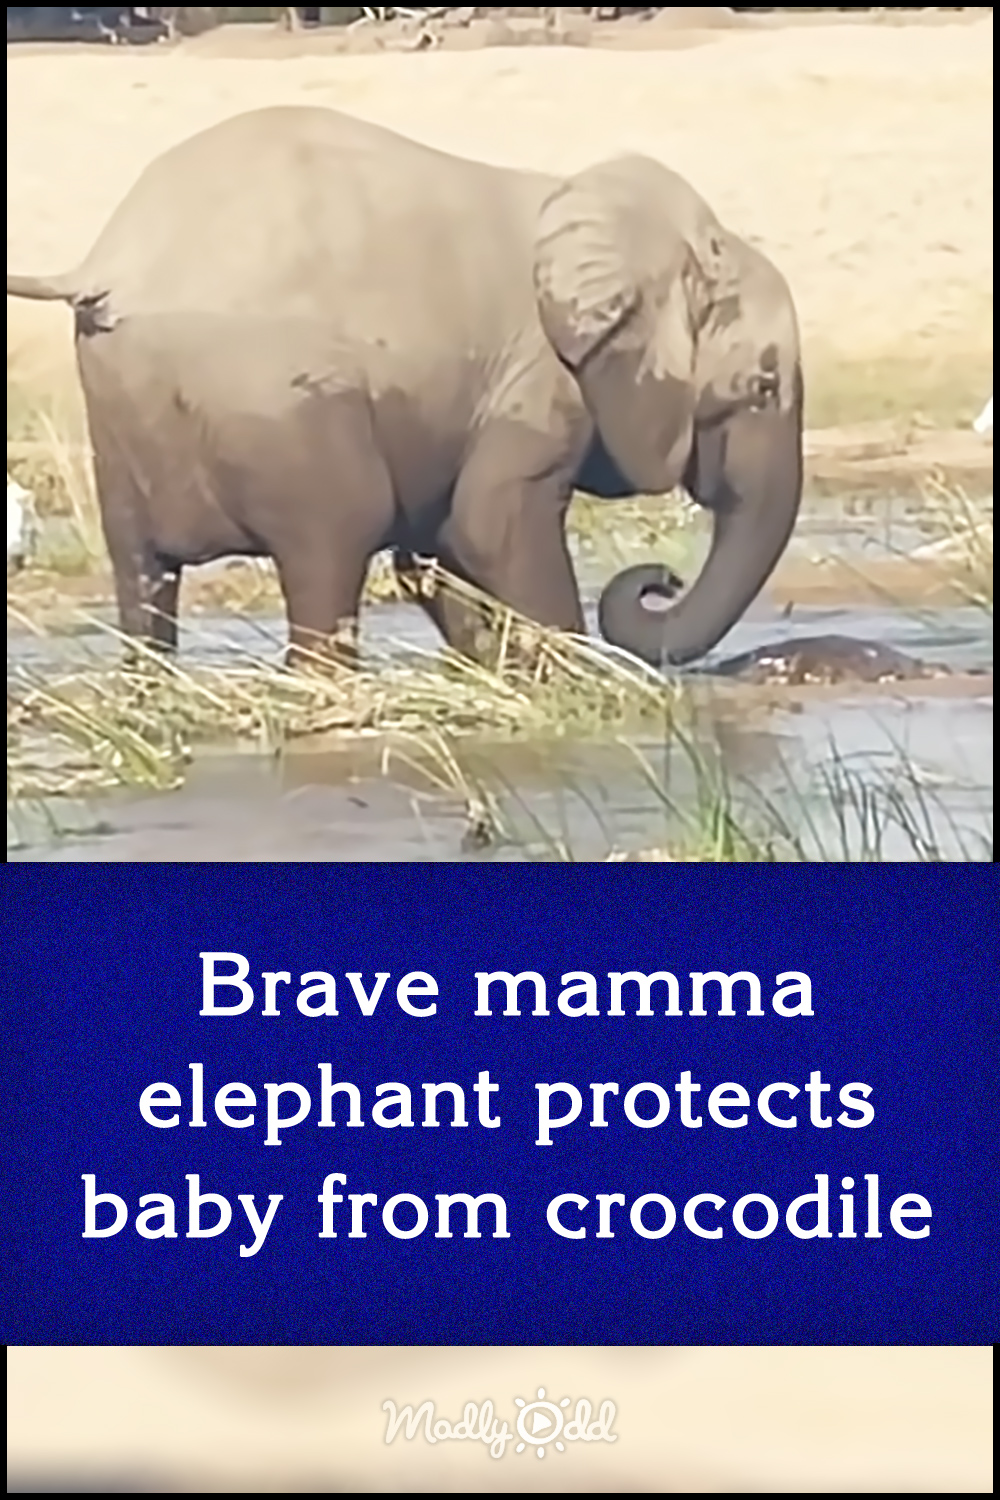 Brave mamma elephant protects baby from crocodile